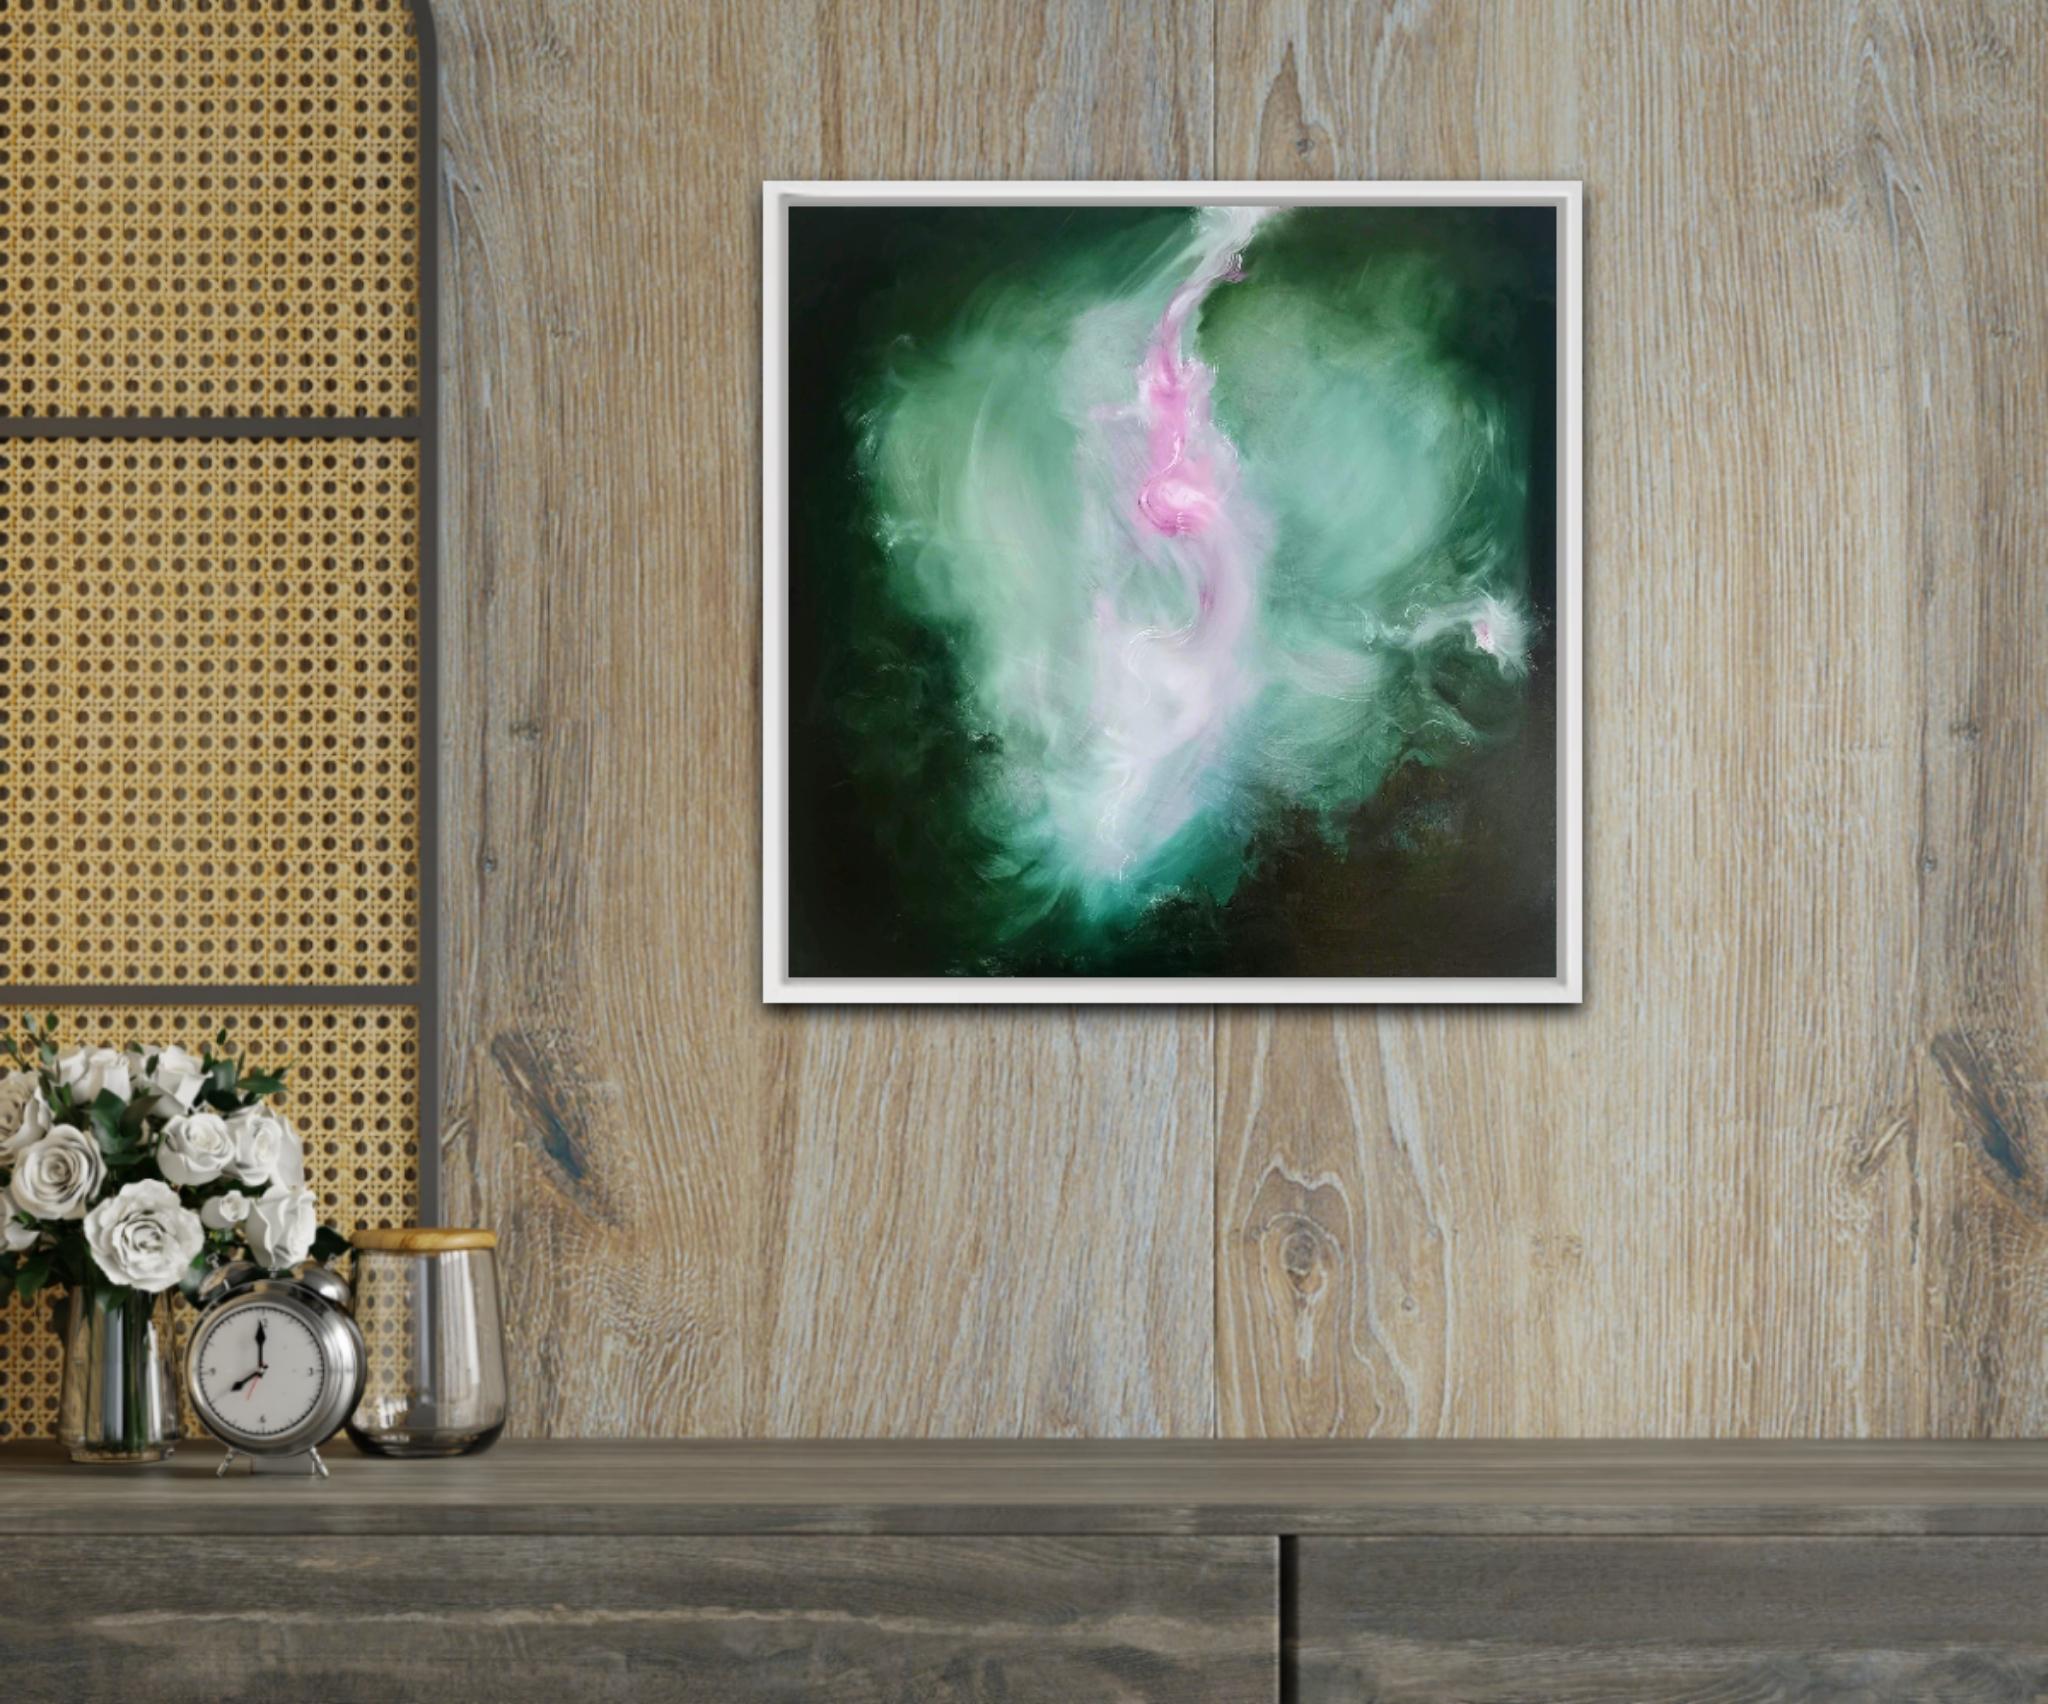 The Believer - Abstract floral painting in green and pink 6